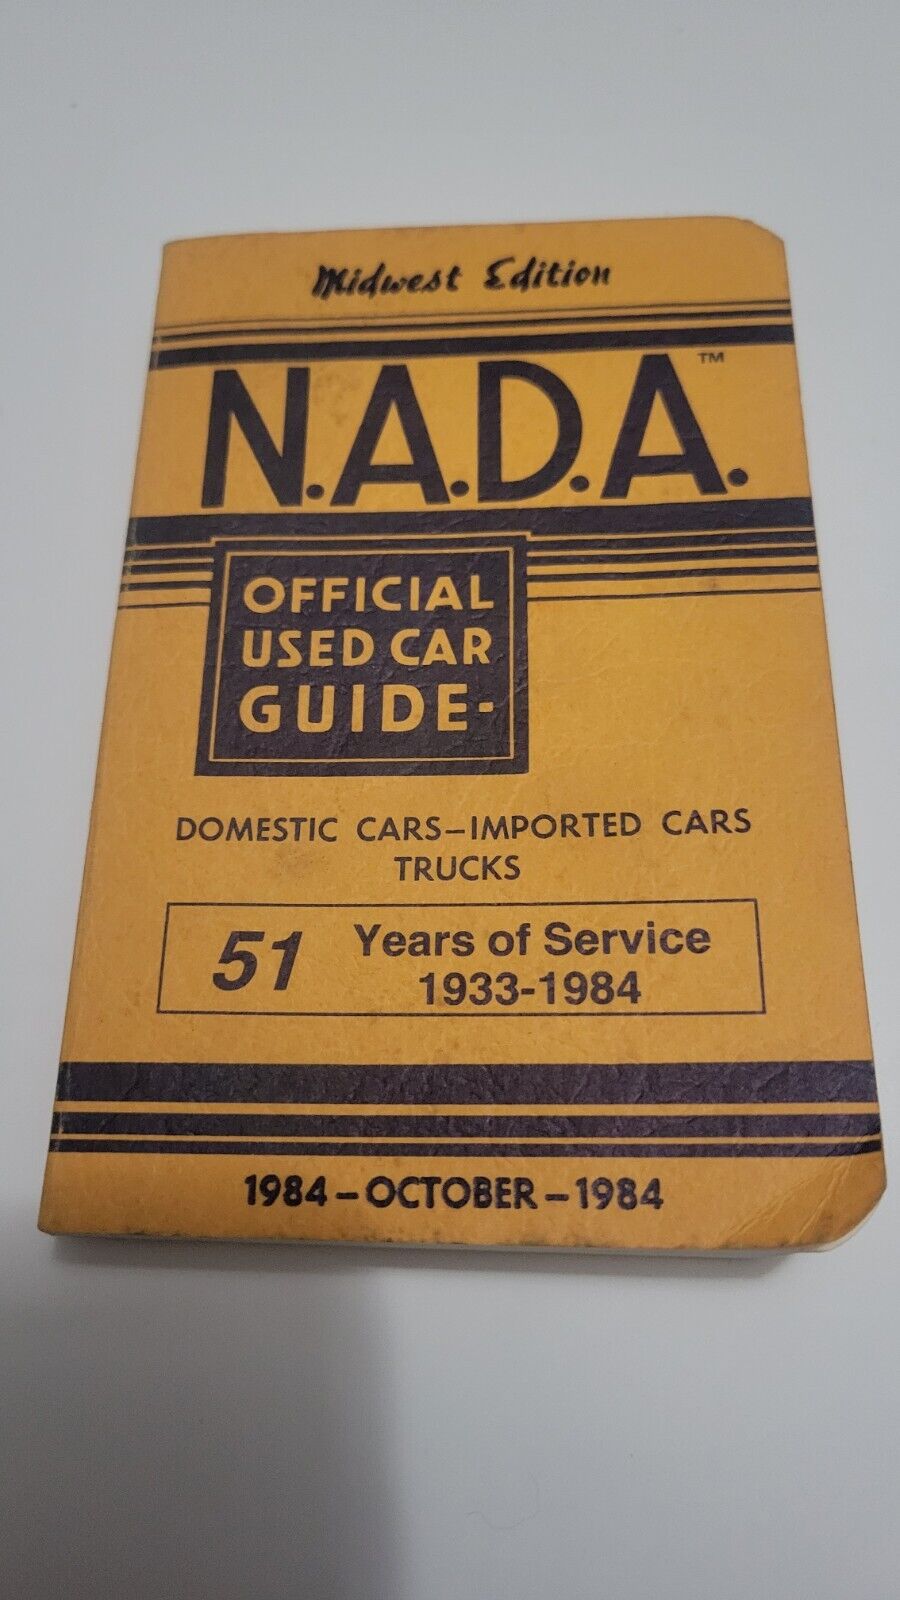 Rare NADA Offical Used Car Guide Dealer Booklet Midwest Edition March 1984-Oct